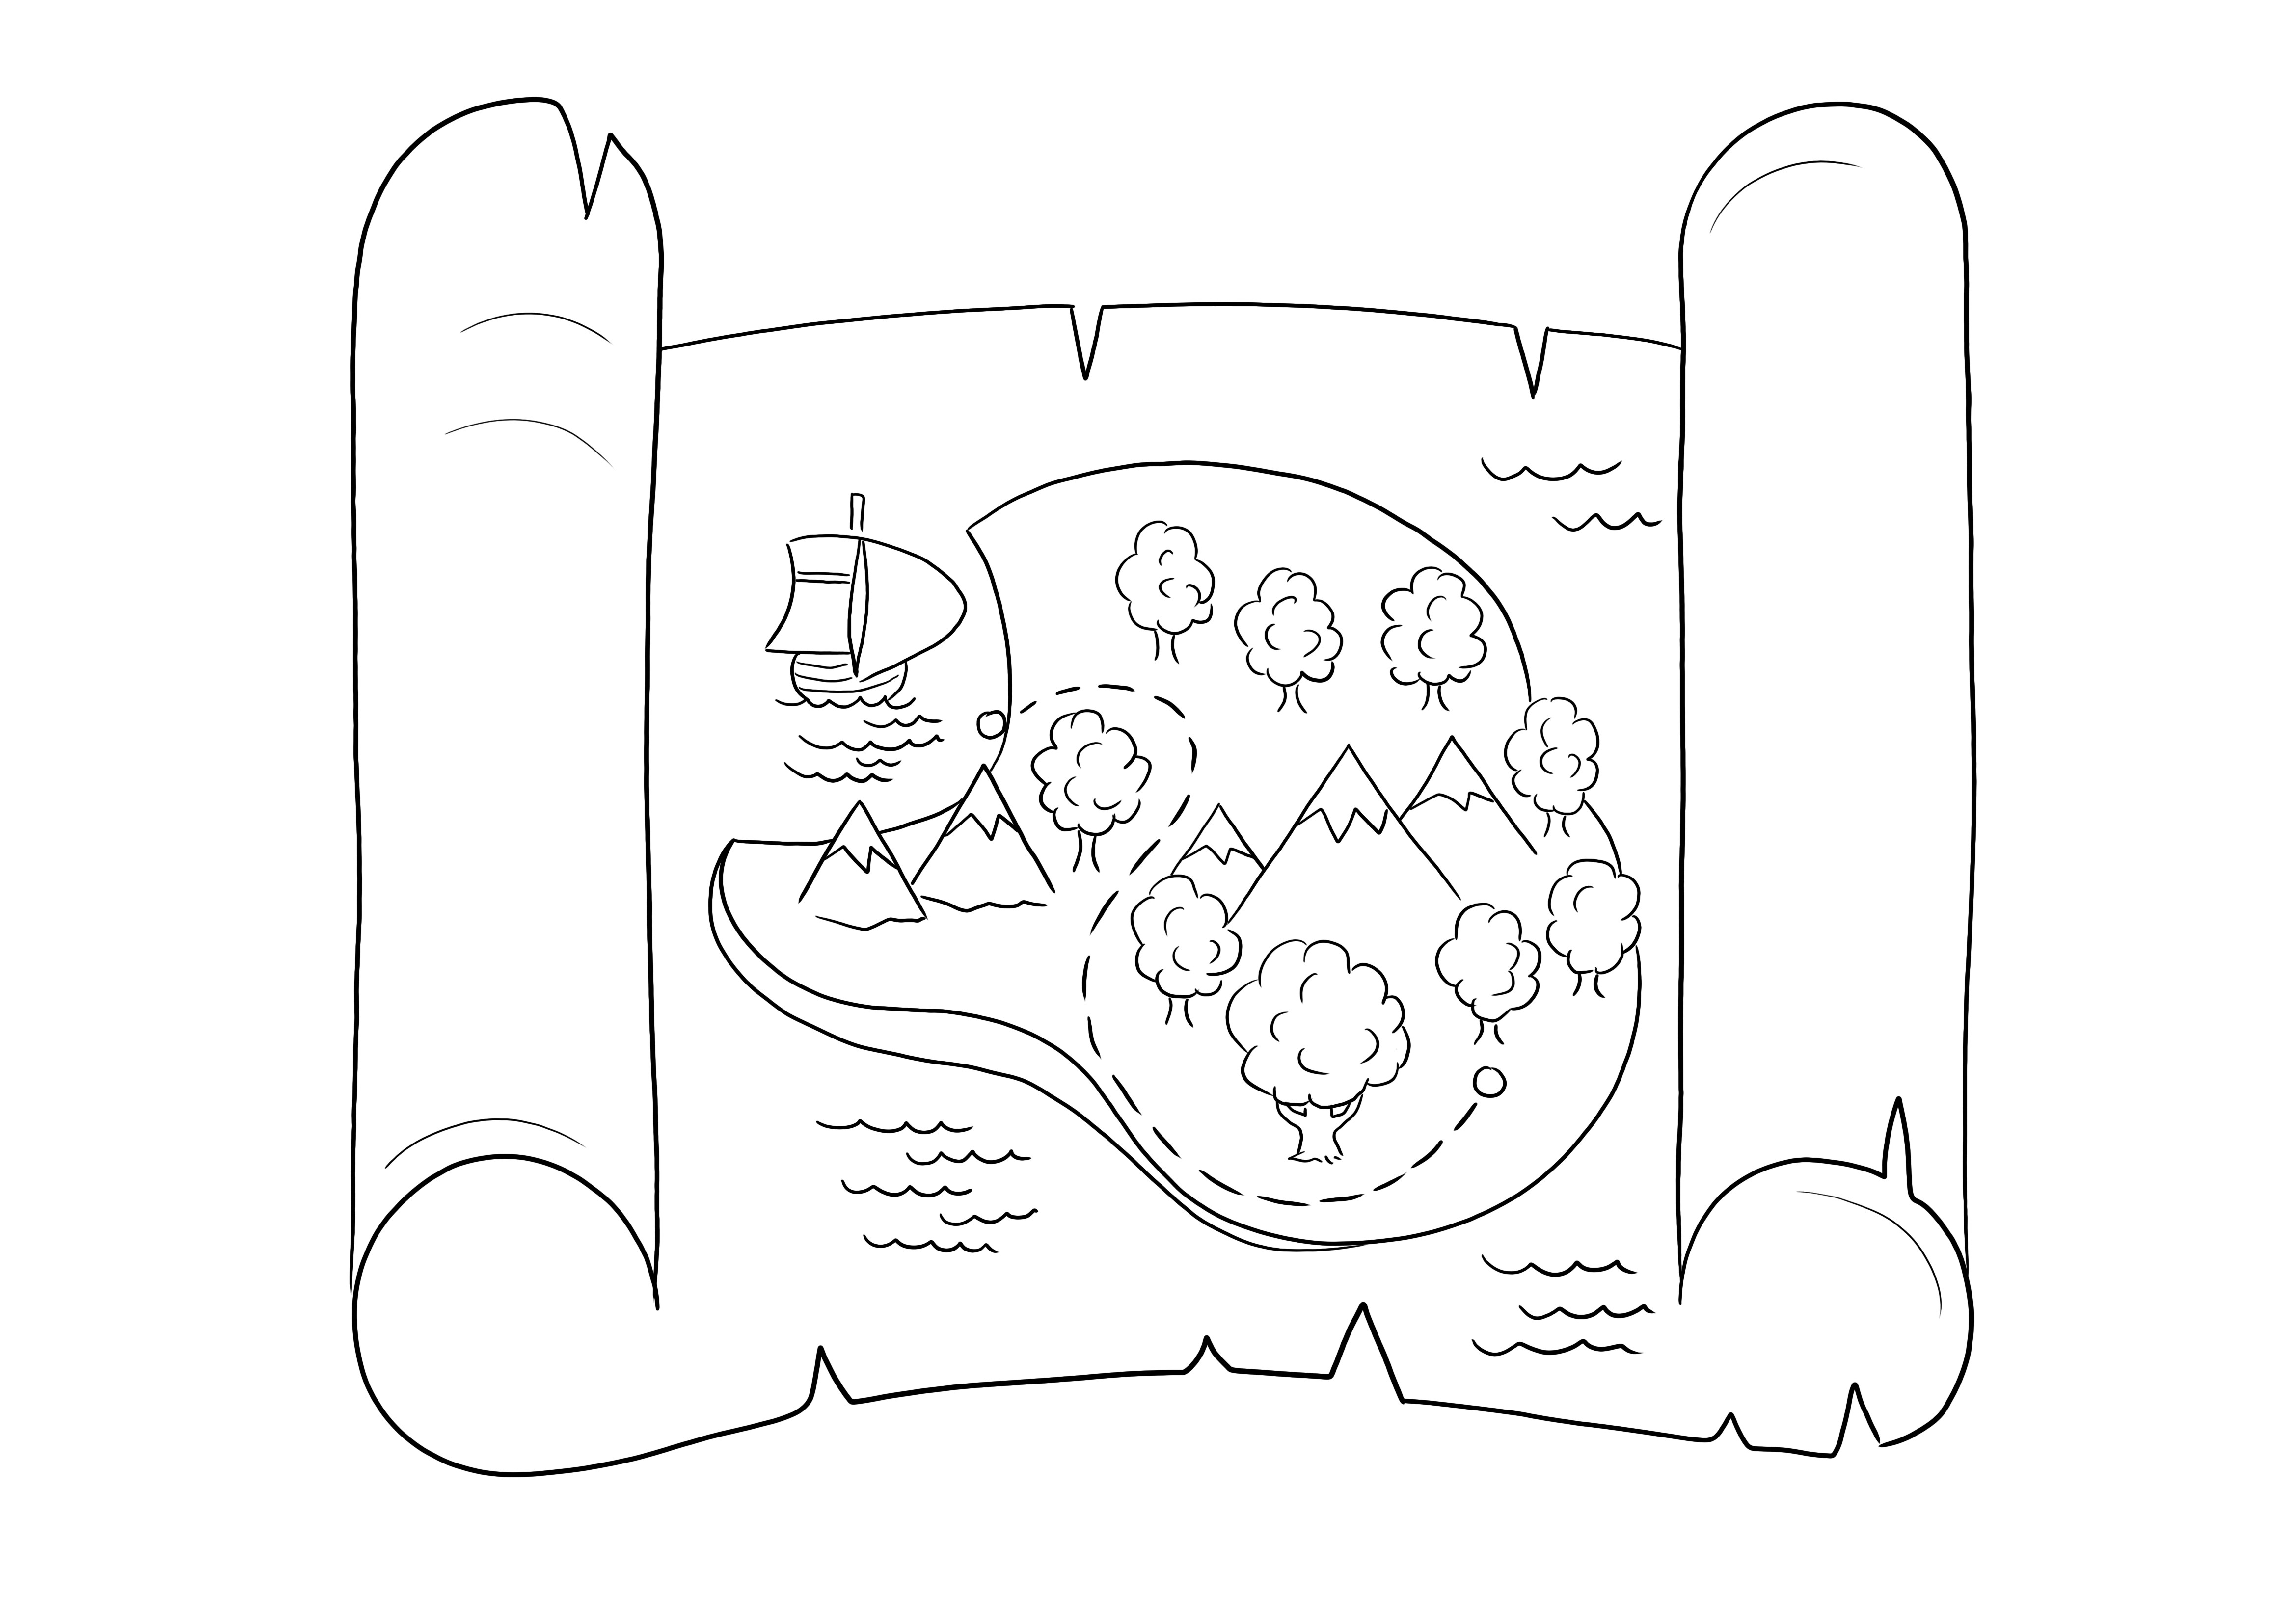 Free printable for coloring a Treasure Map for kids to enjoy drawing session